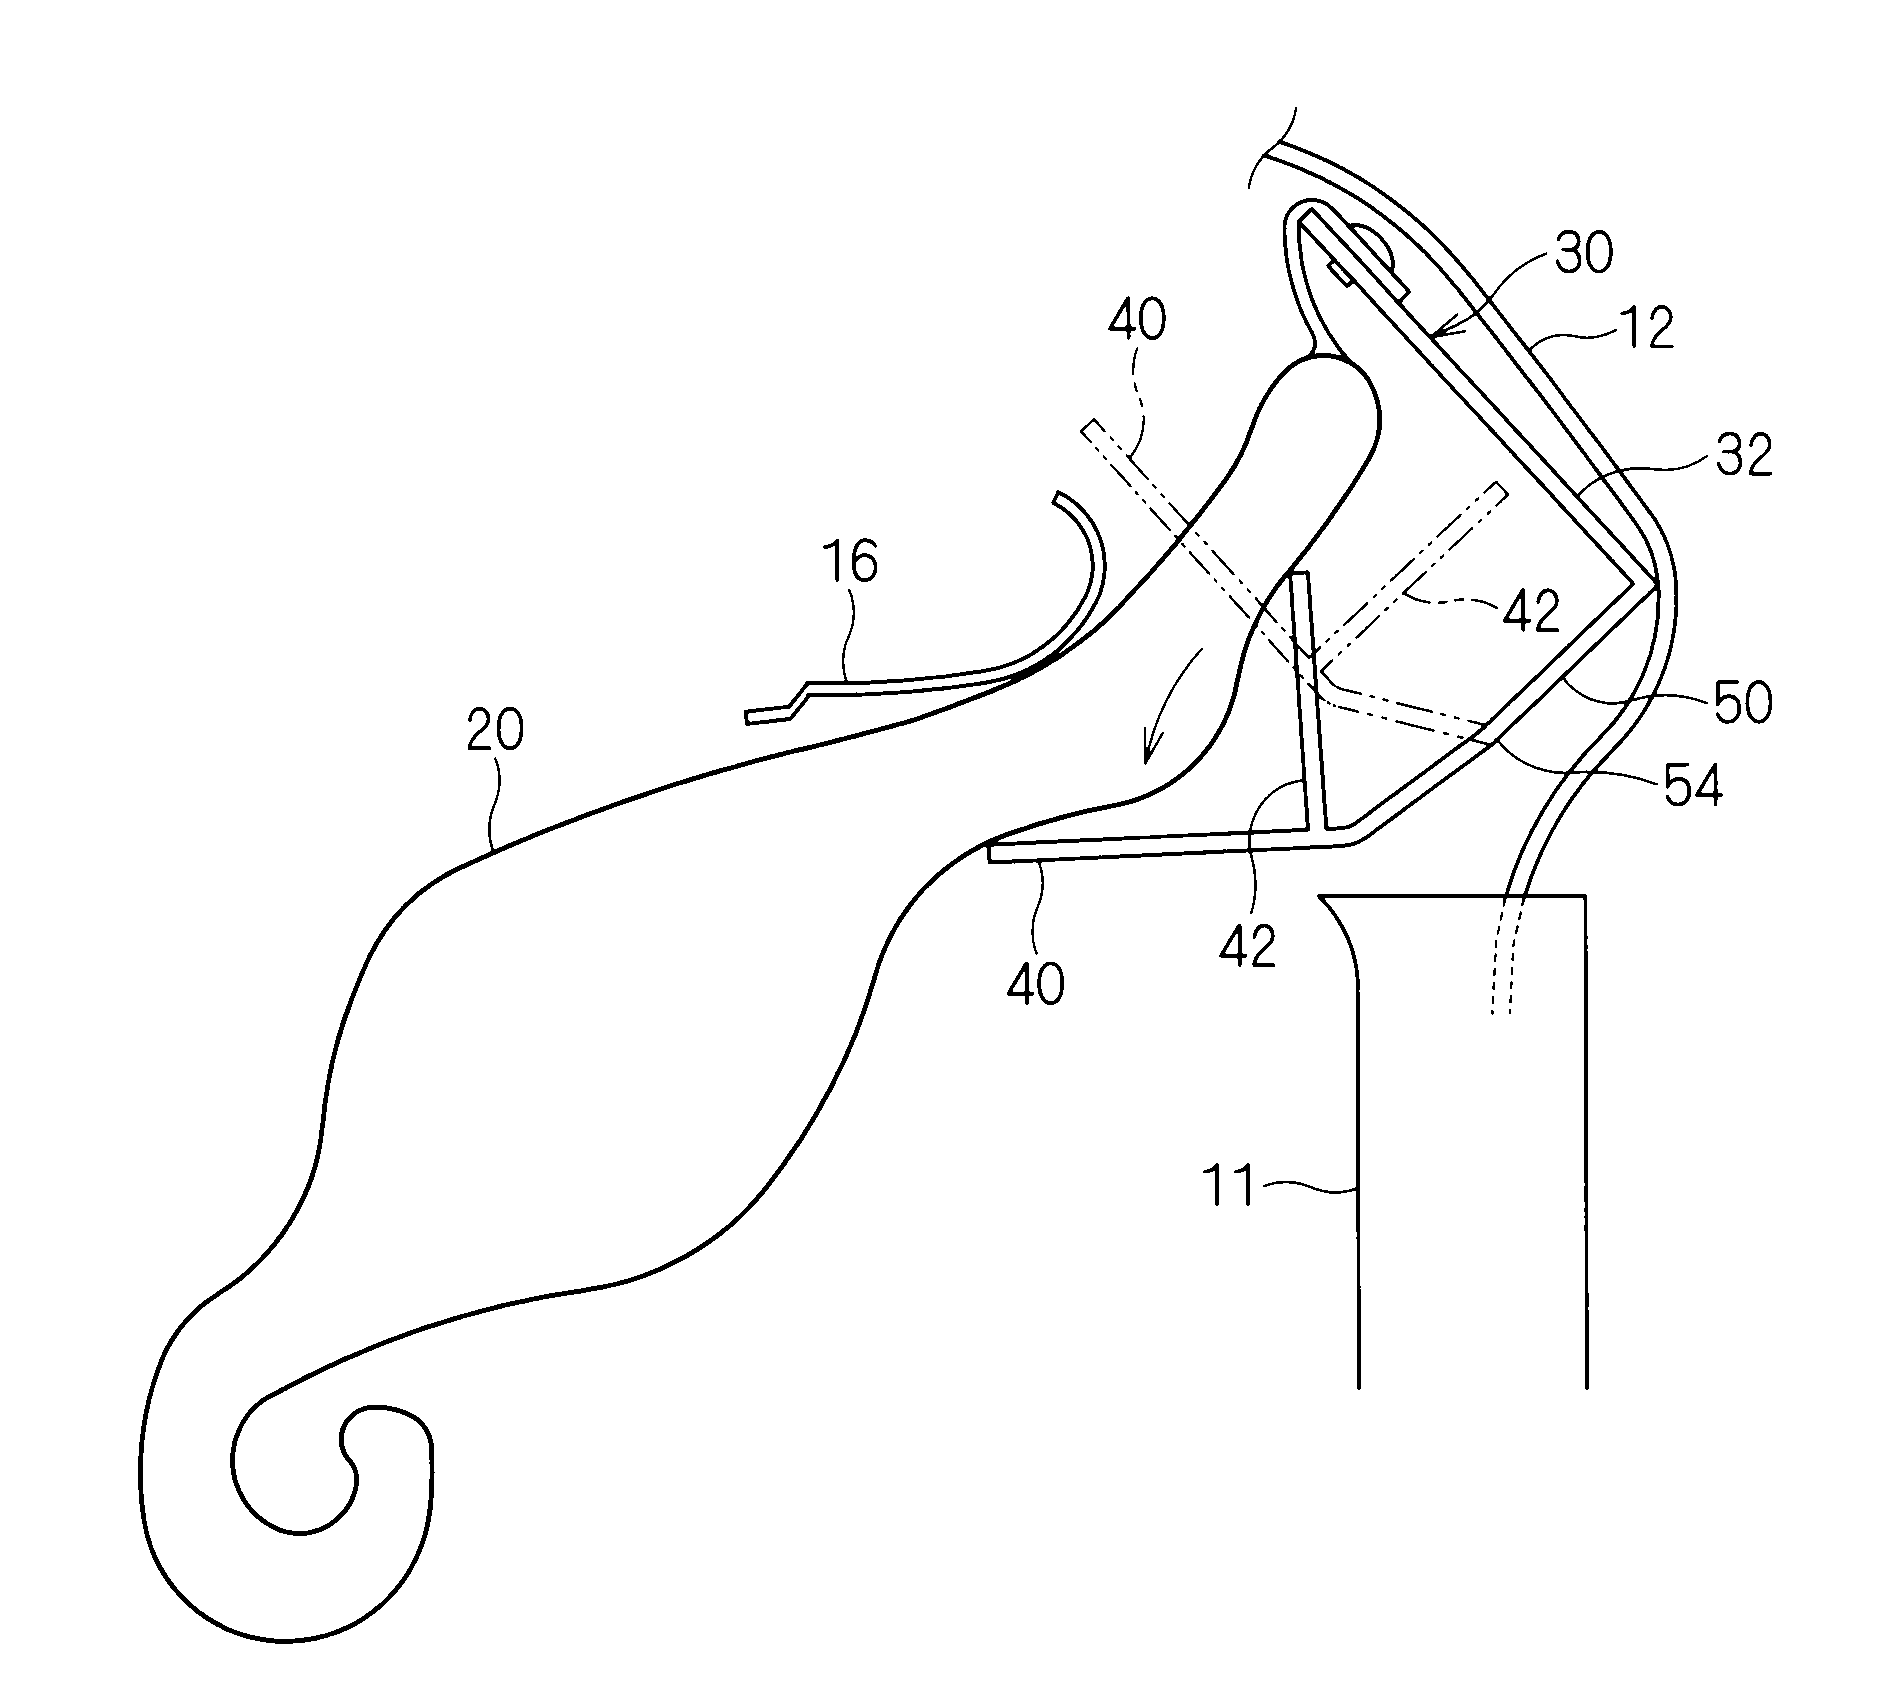 Member for restricting expansion of curtain airbag and structure of portion where curtain airbag is mounted